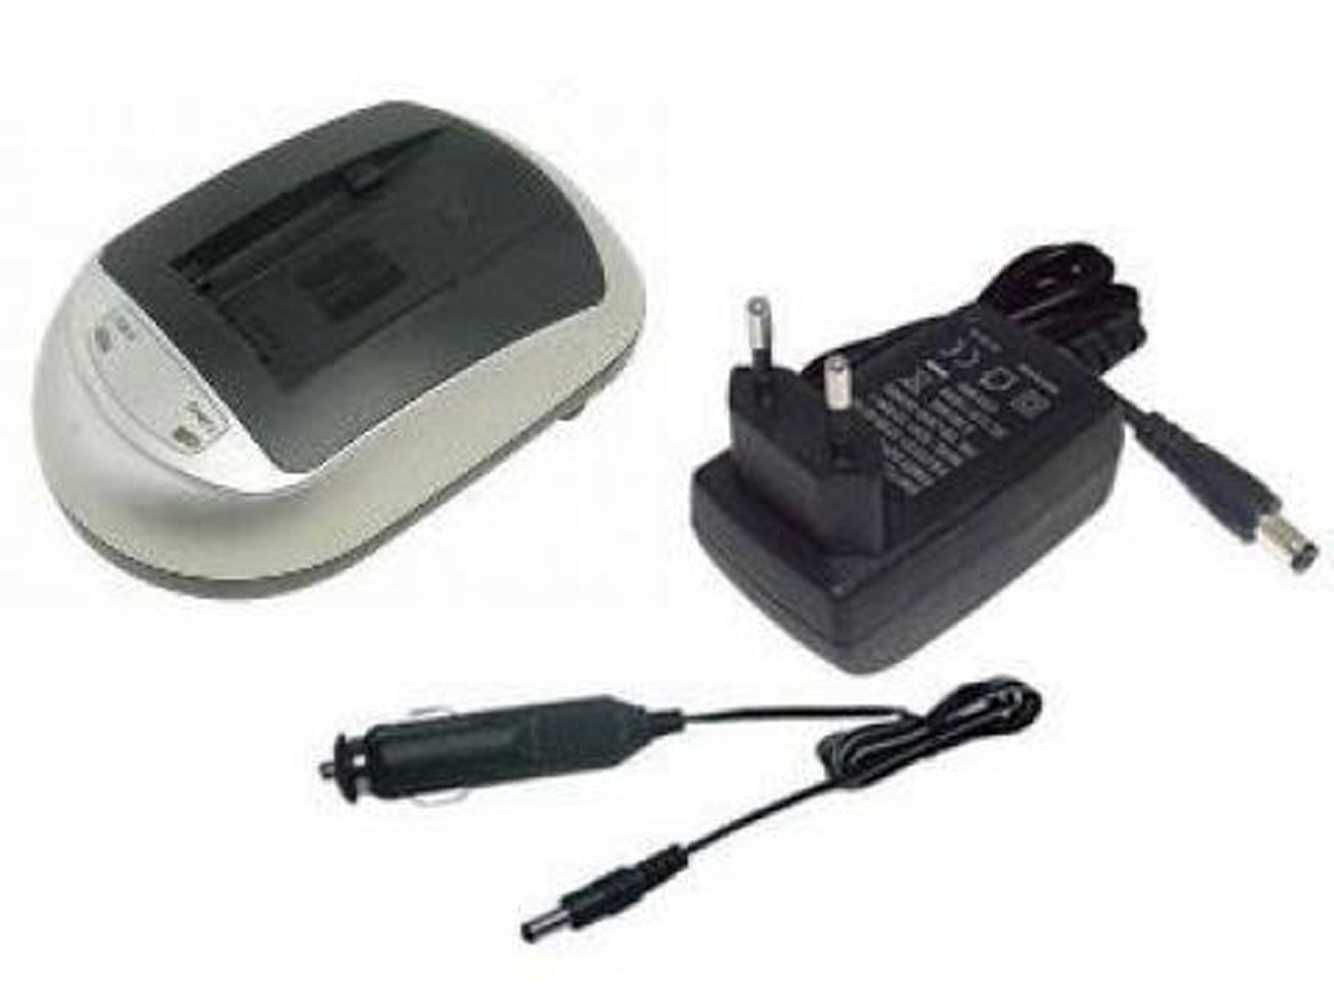 Battery Charger for SONY NP-FH100, NP-FH30, NP-FH40, NP-FH50, NP-FH60, NP-FH70, NP-FP30, NP-FP50, NP-FP70, NP-FP71, NP-FP90, NP-FV100, NP-FV30, NP-FV70